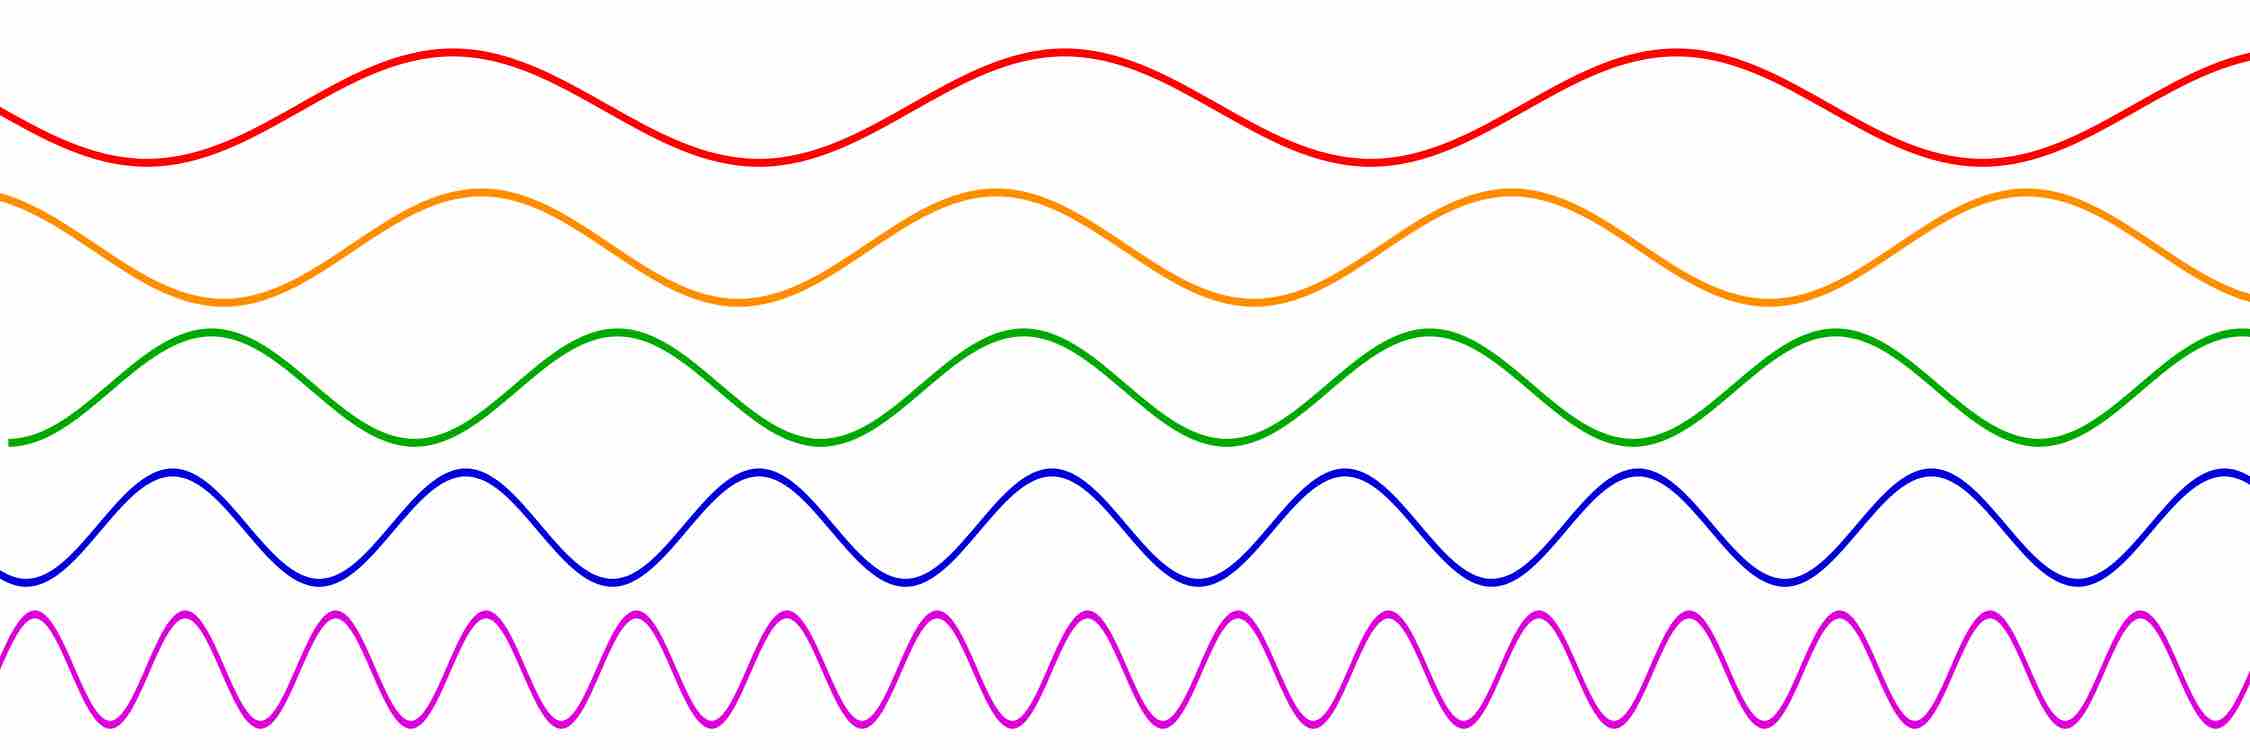 Sinusoidal Waves of Varying Frequencies